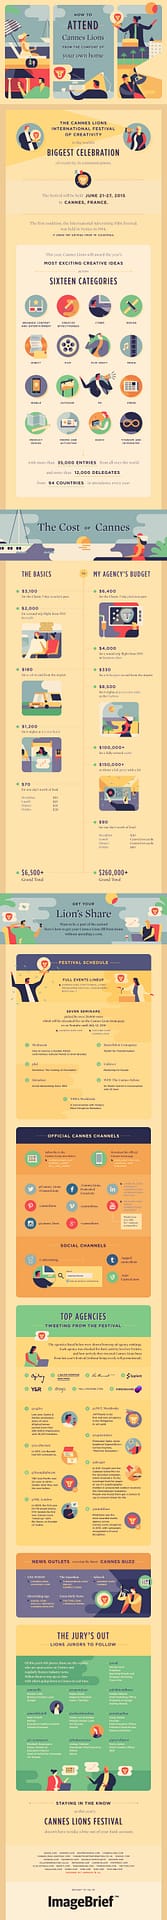 cannes-lions-infographic-3